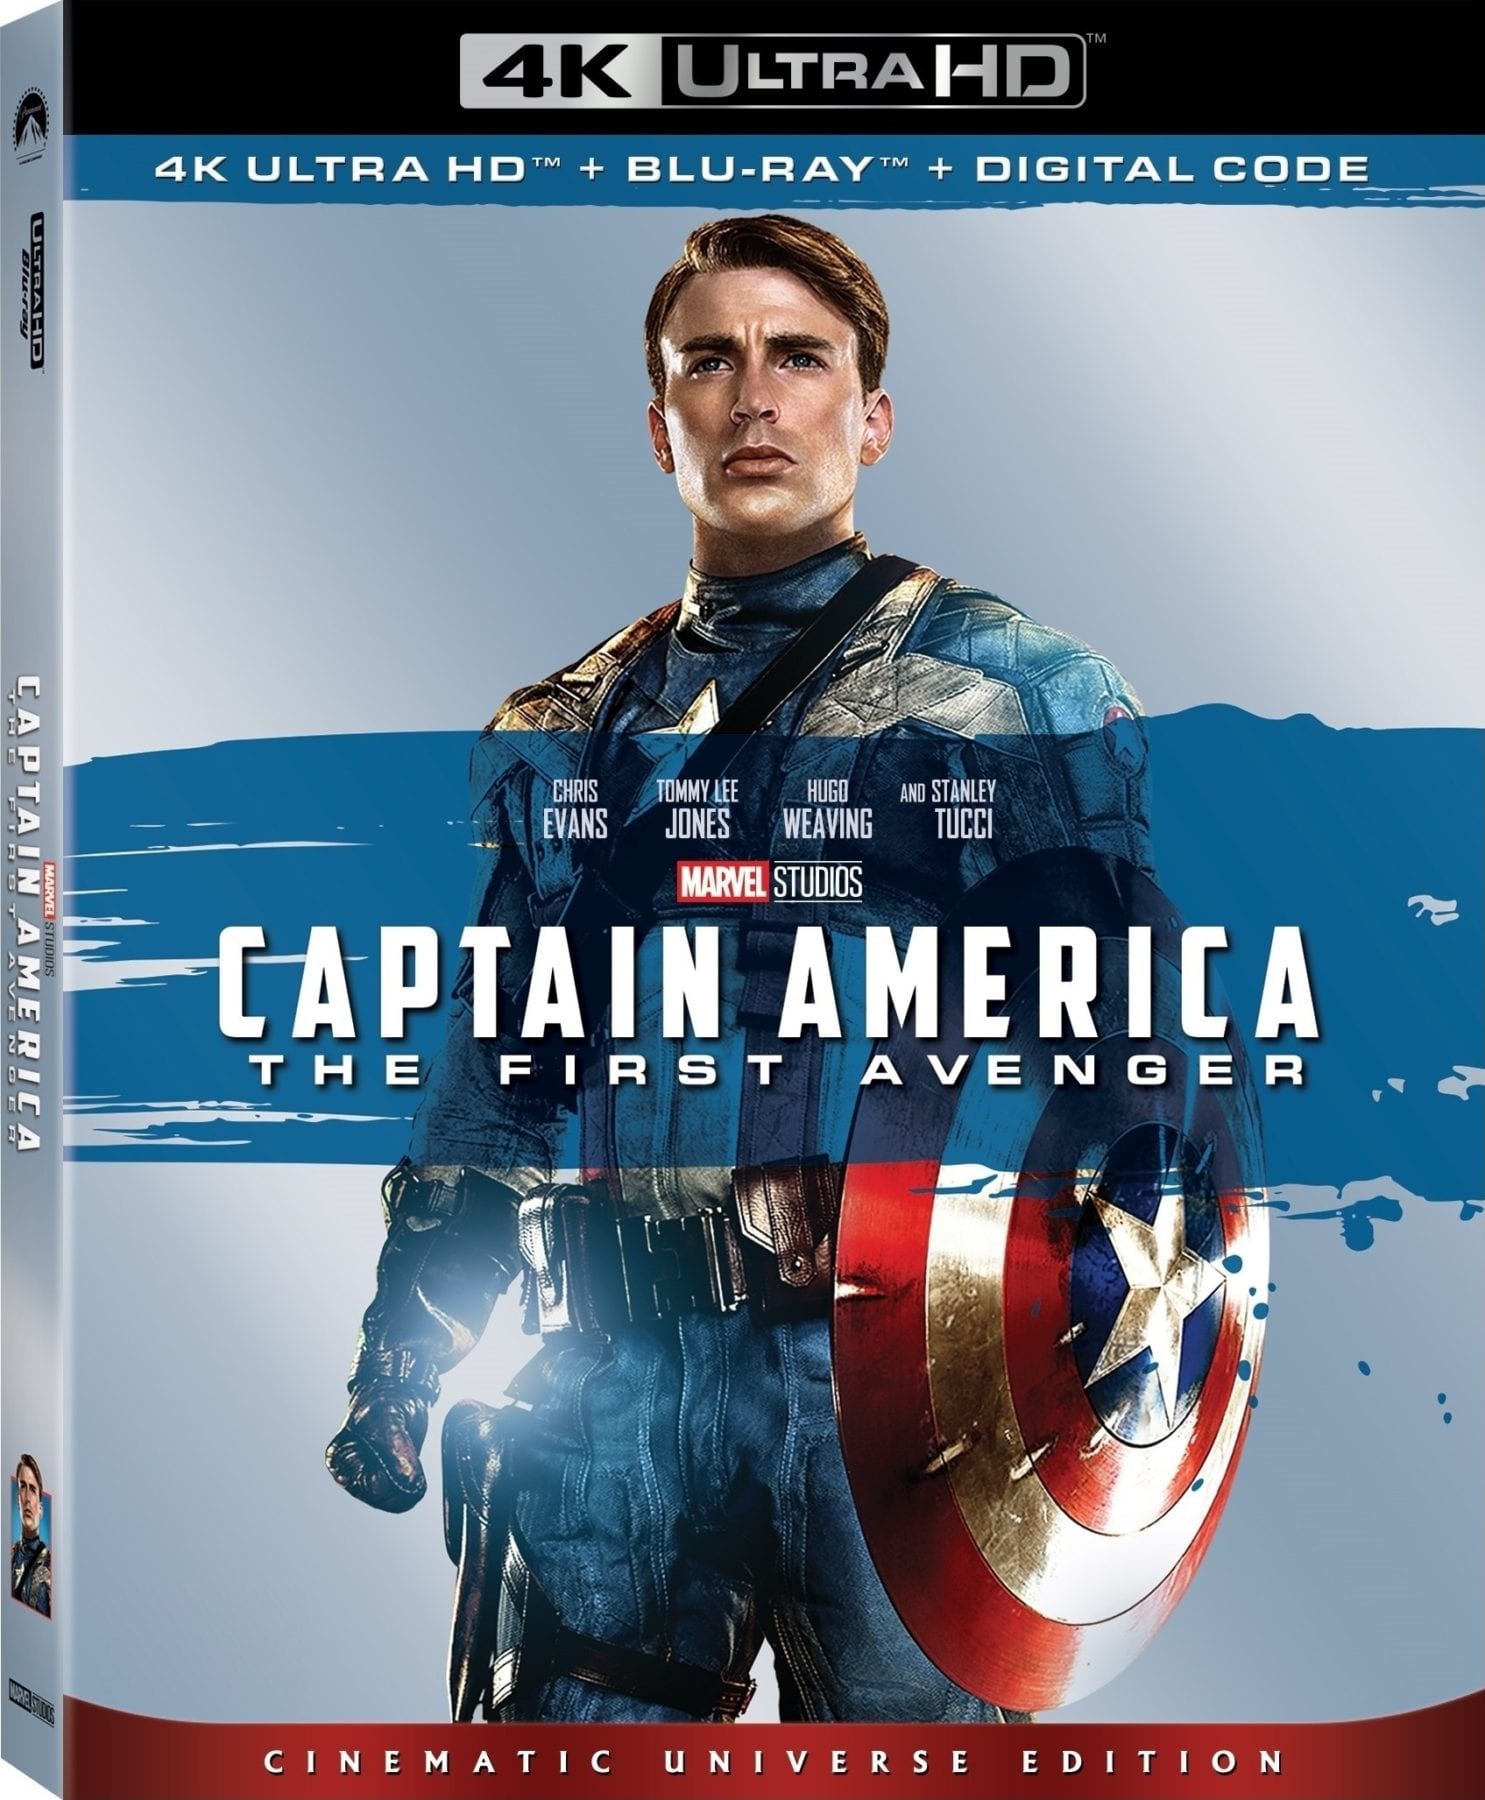 Captain America: The First Avenger to receive 4K release 